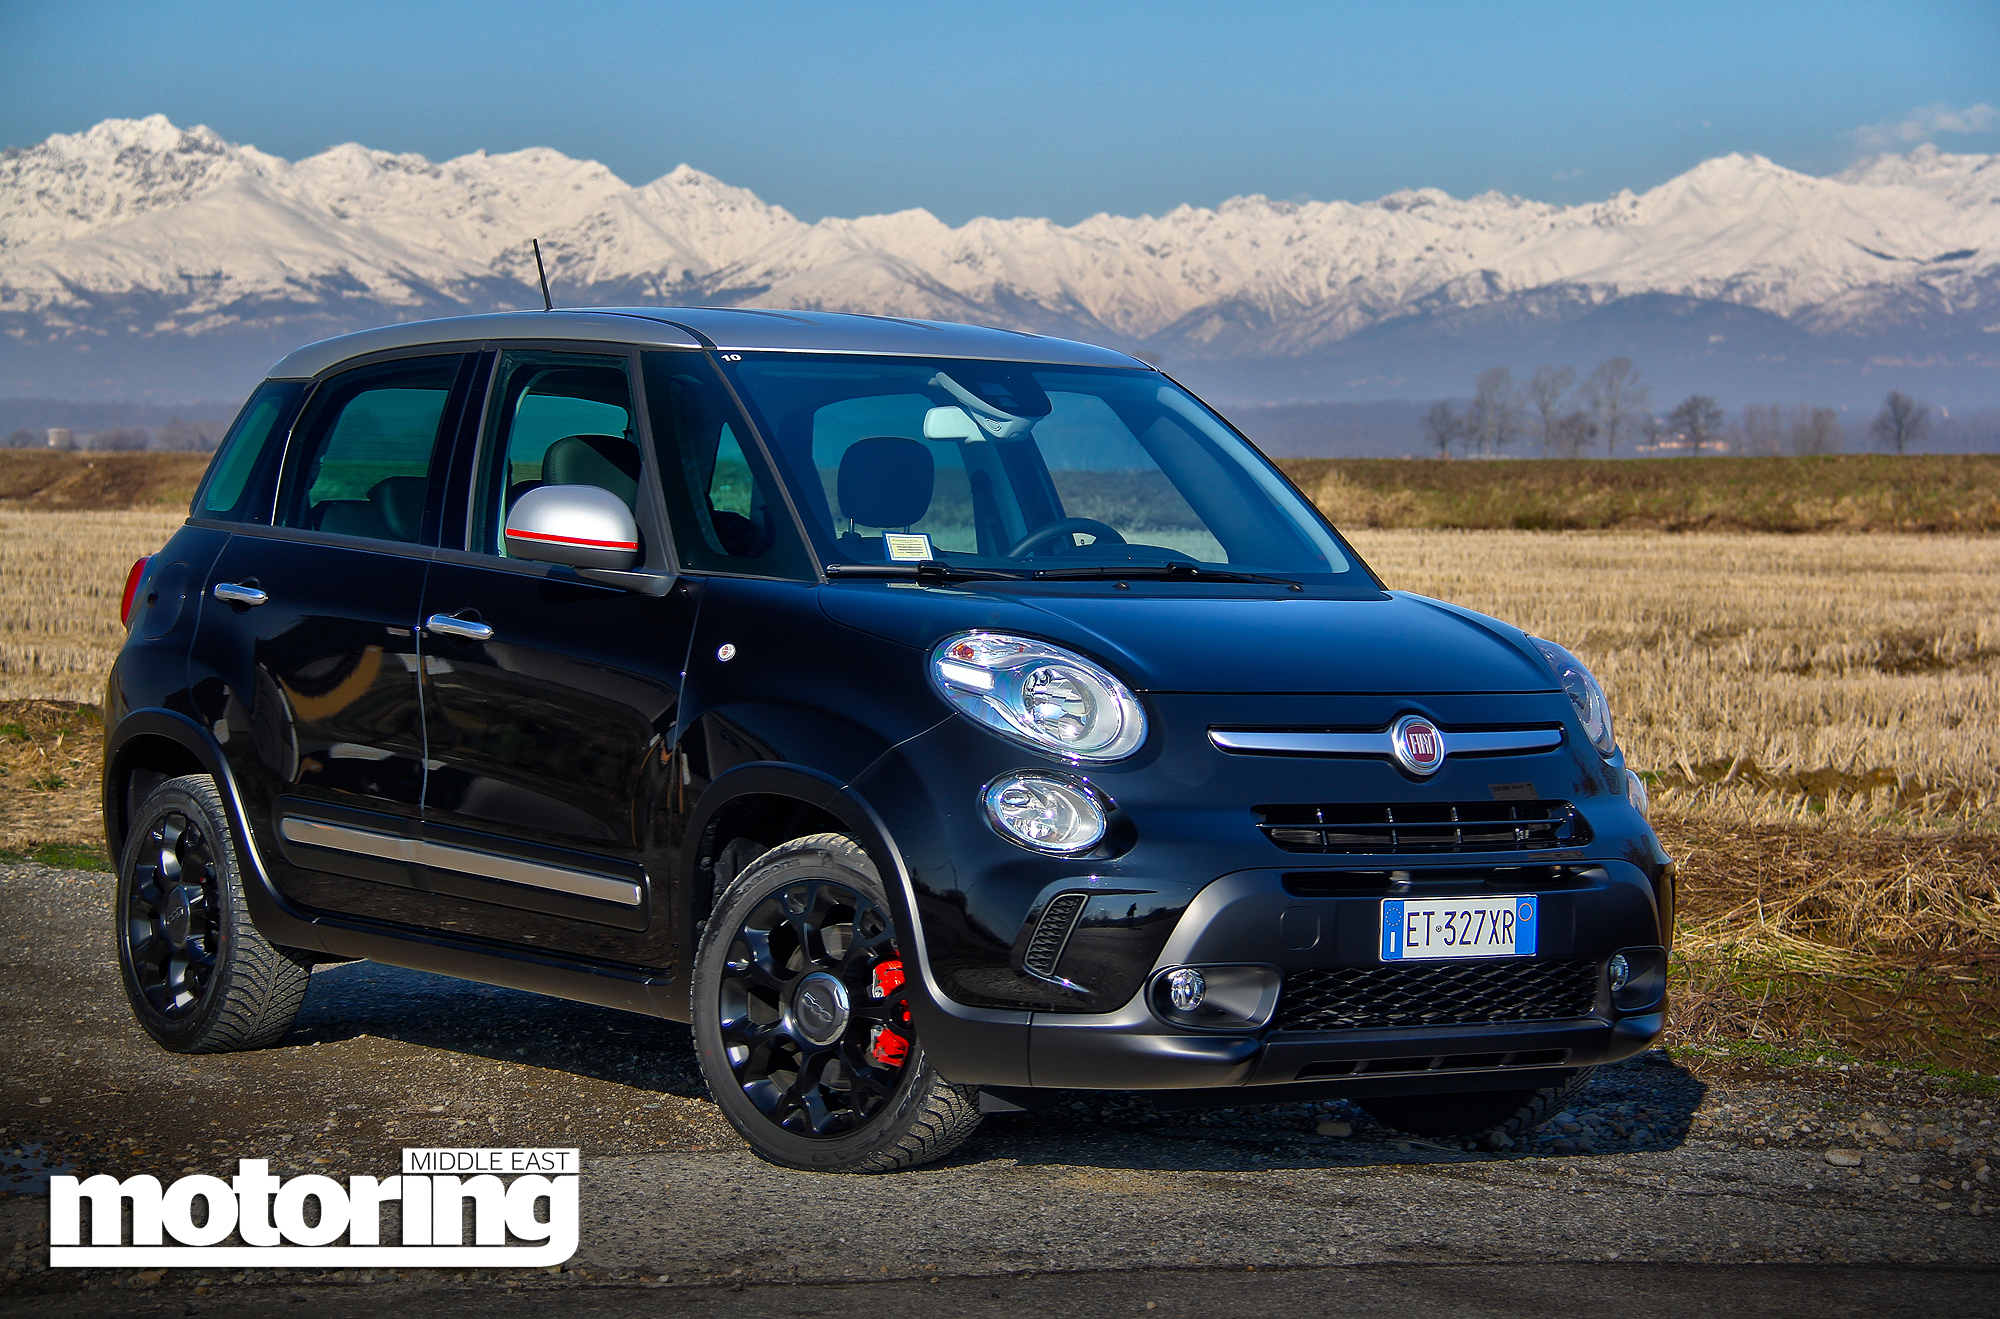 2014 Fiat 500L Trekking, Middle East launch, spec and price with  videoMotoring Middle East: Car news, Reviews and Buying guides